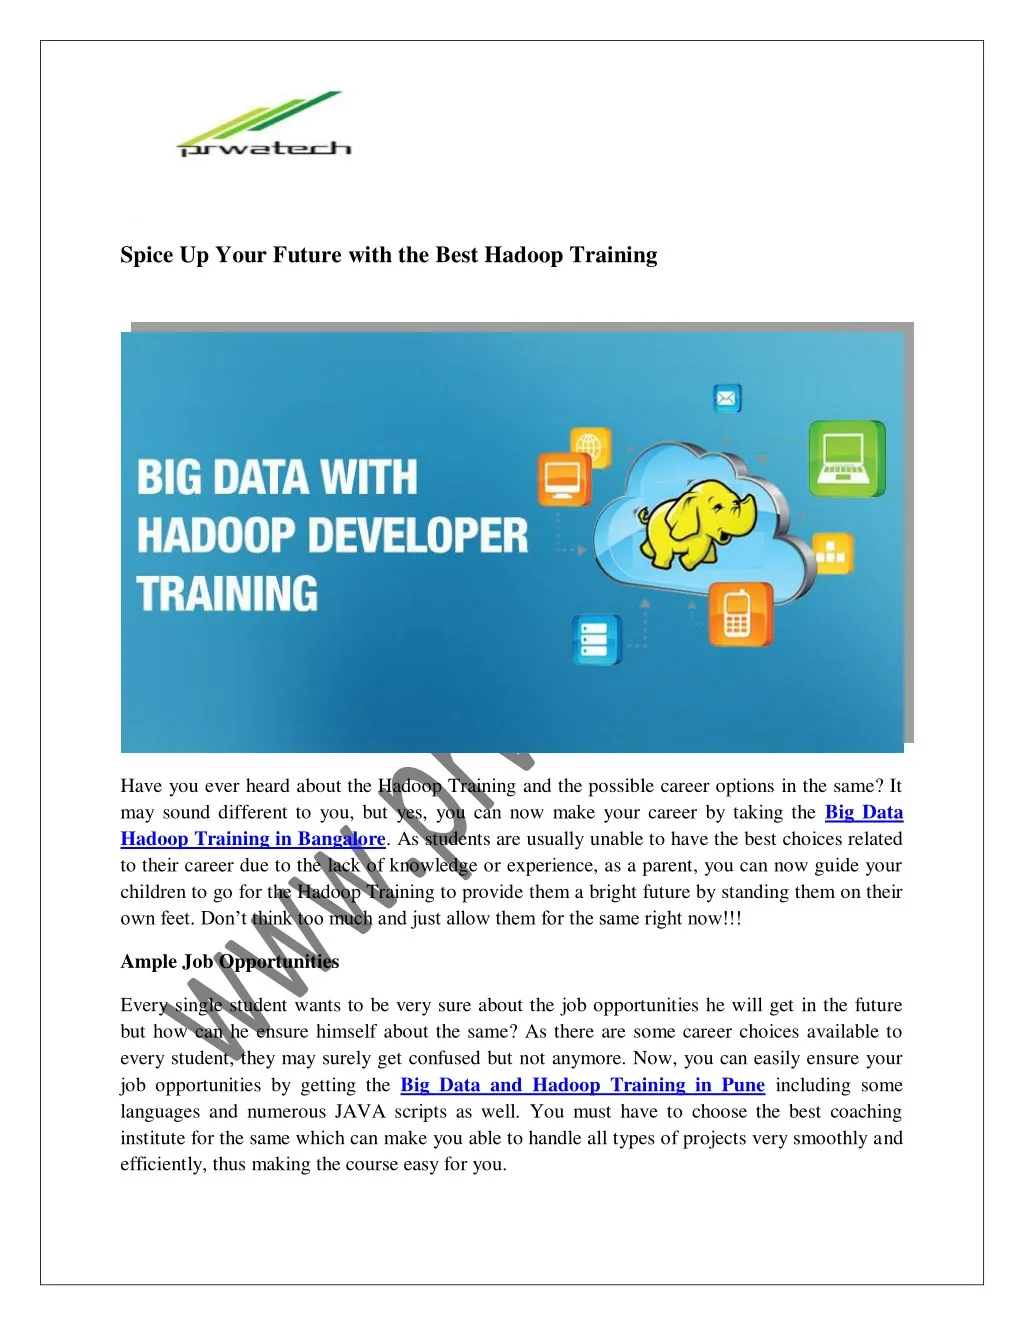 spice up your future with the best hadoop training